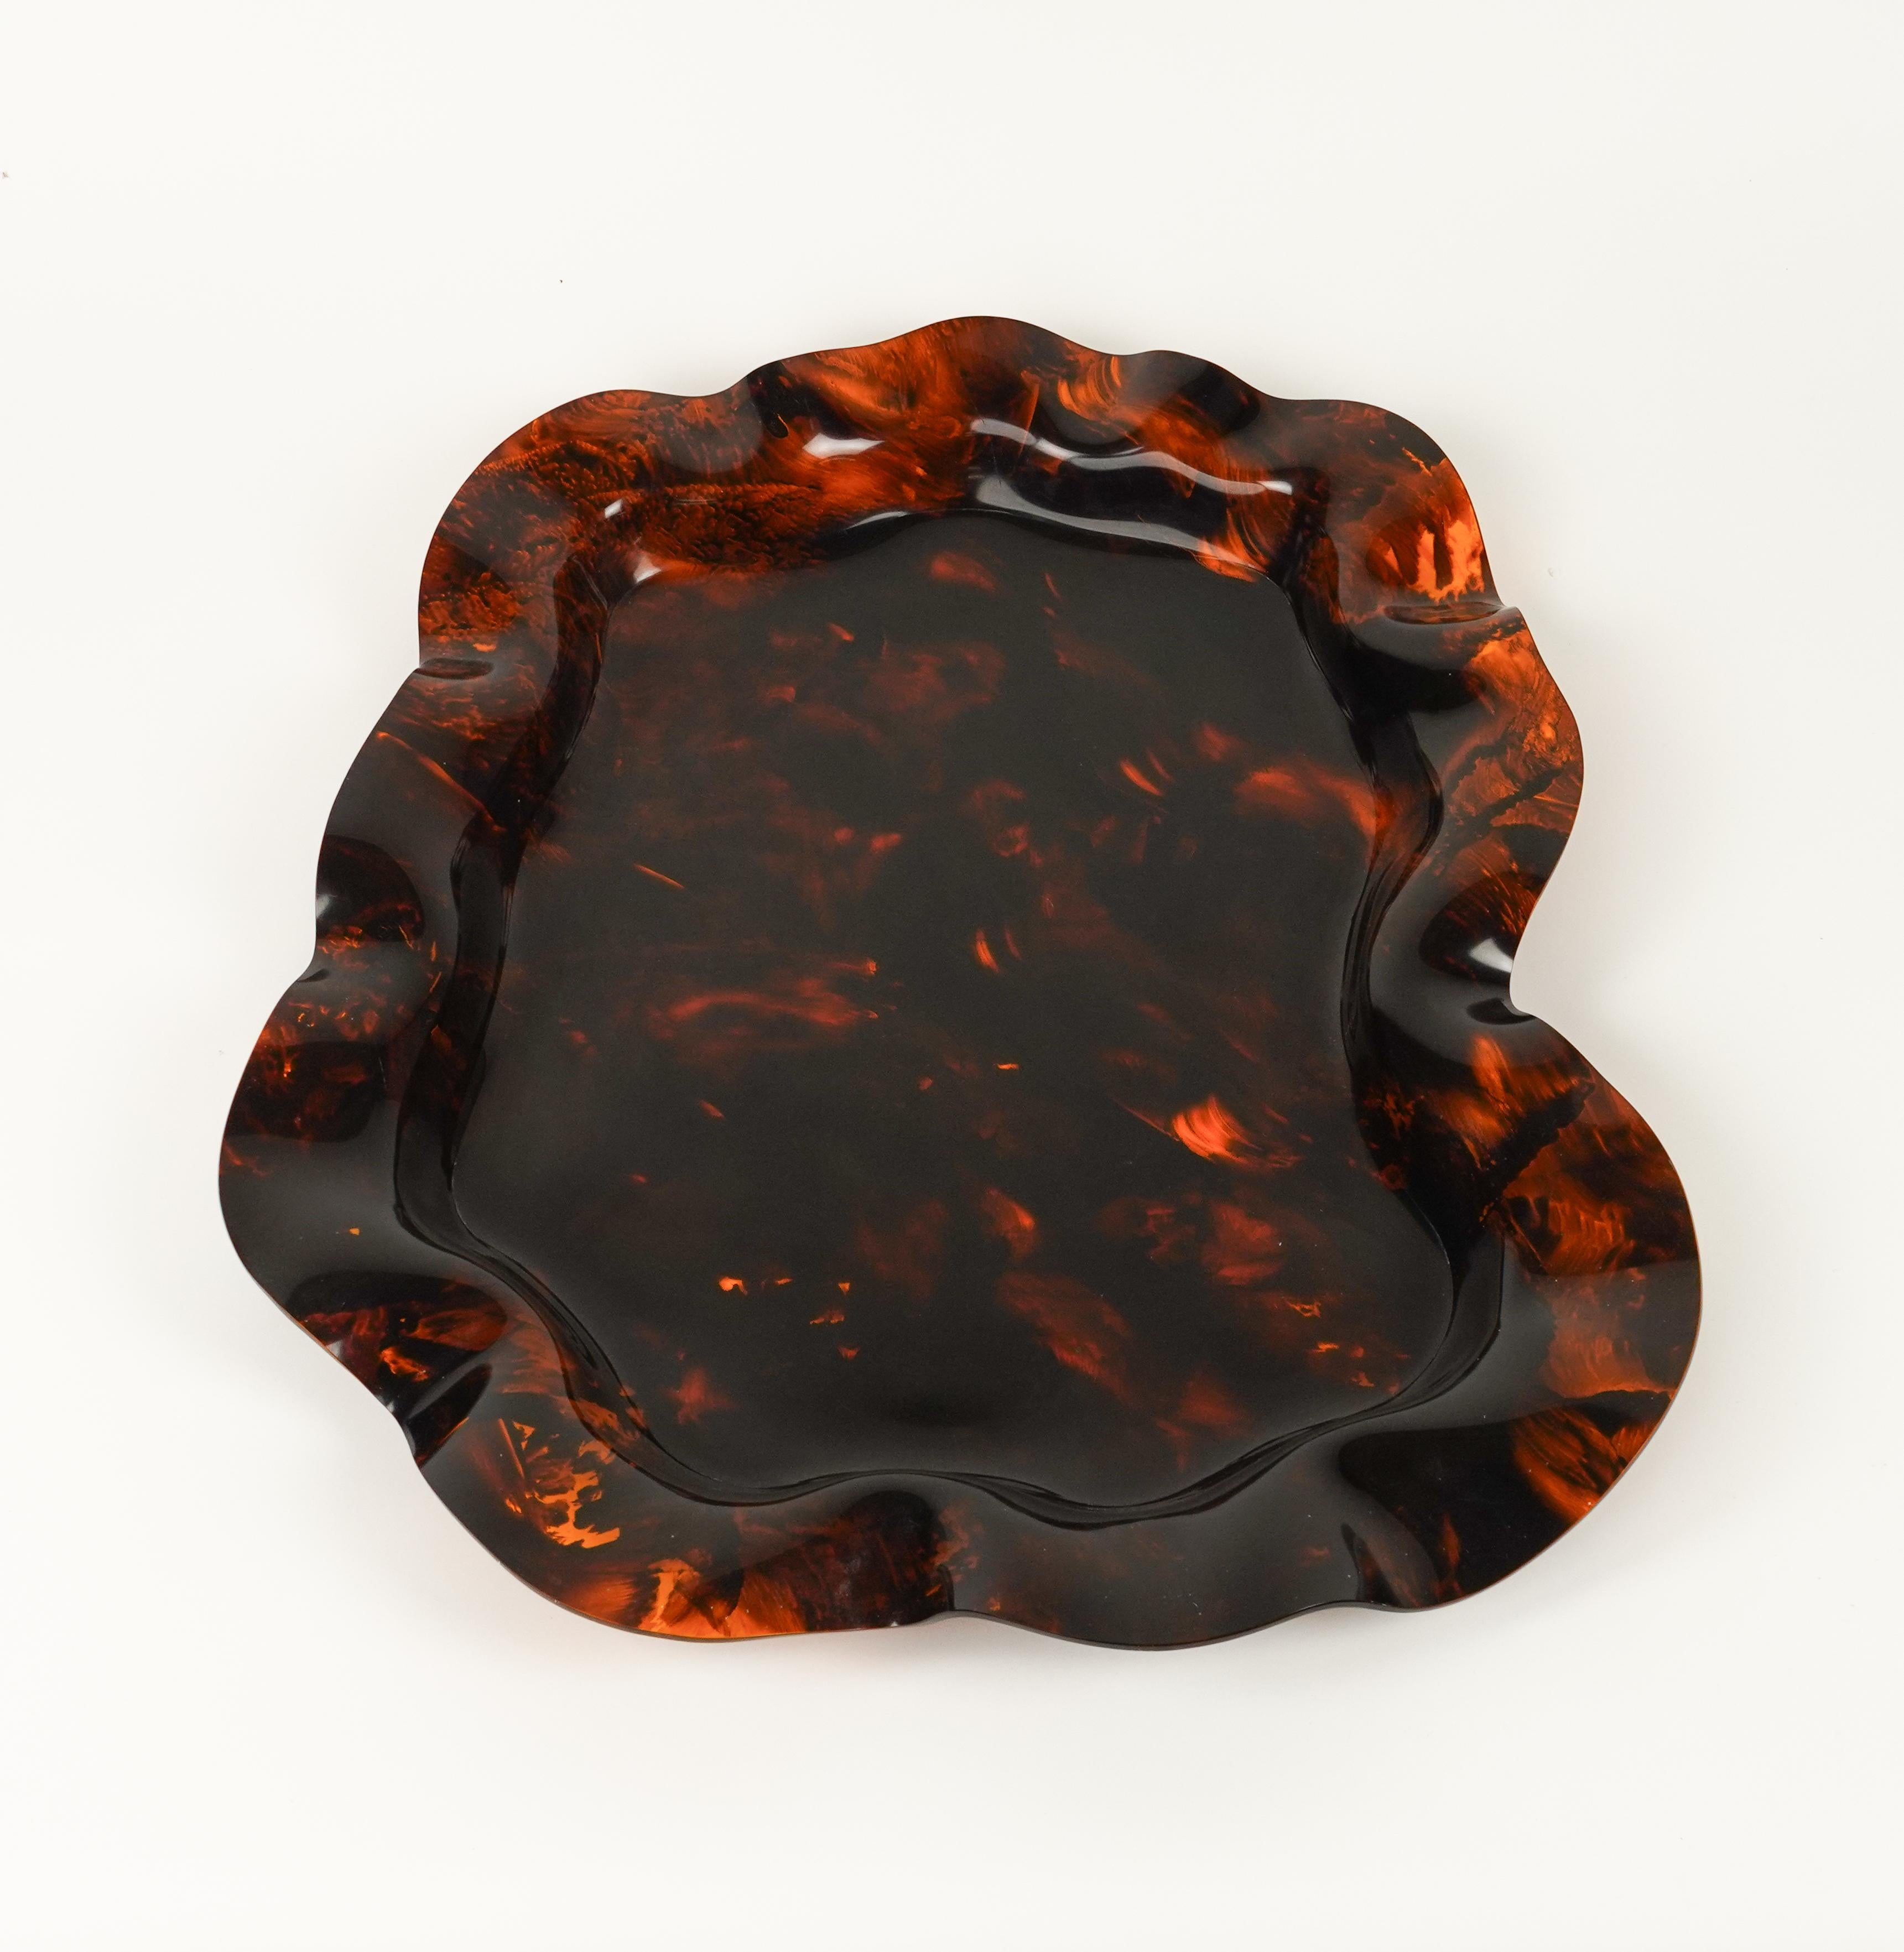 Large Serving Tray or Centerpiece Lucite Faux Tortoiseshell, Italy 1970s For Sale 4